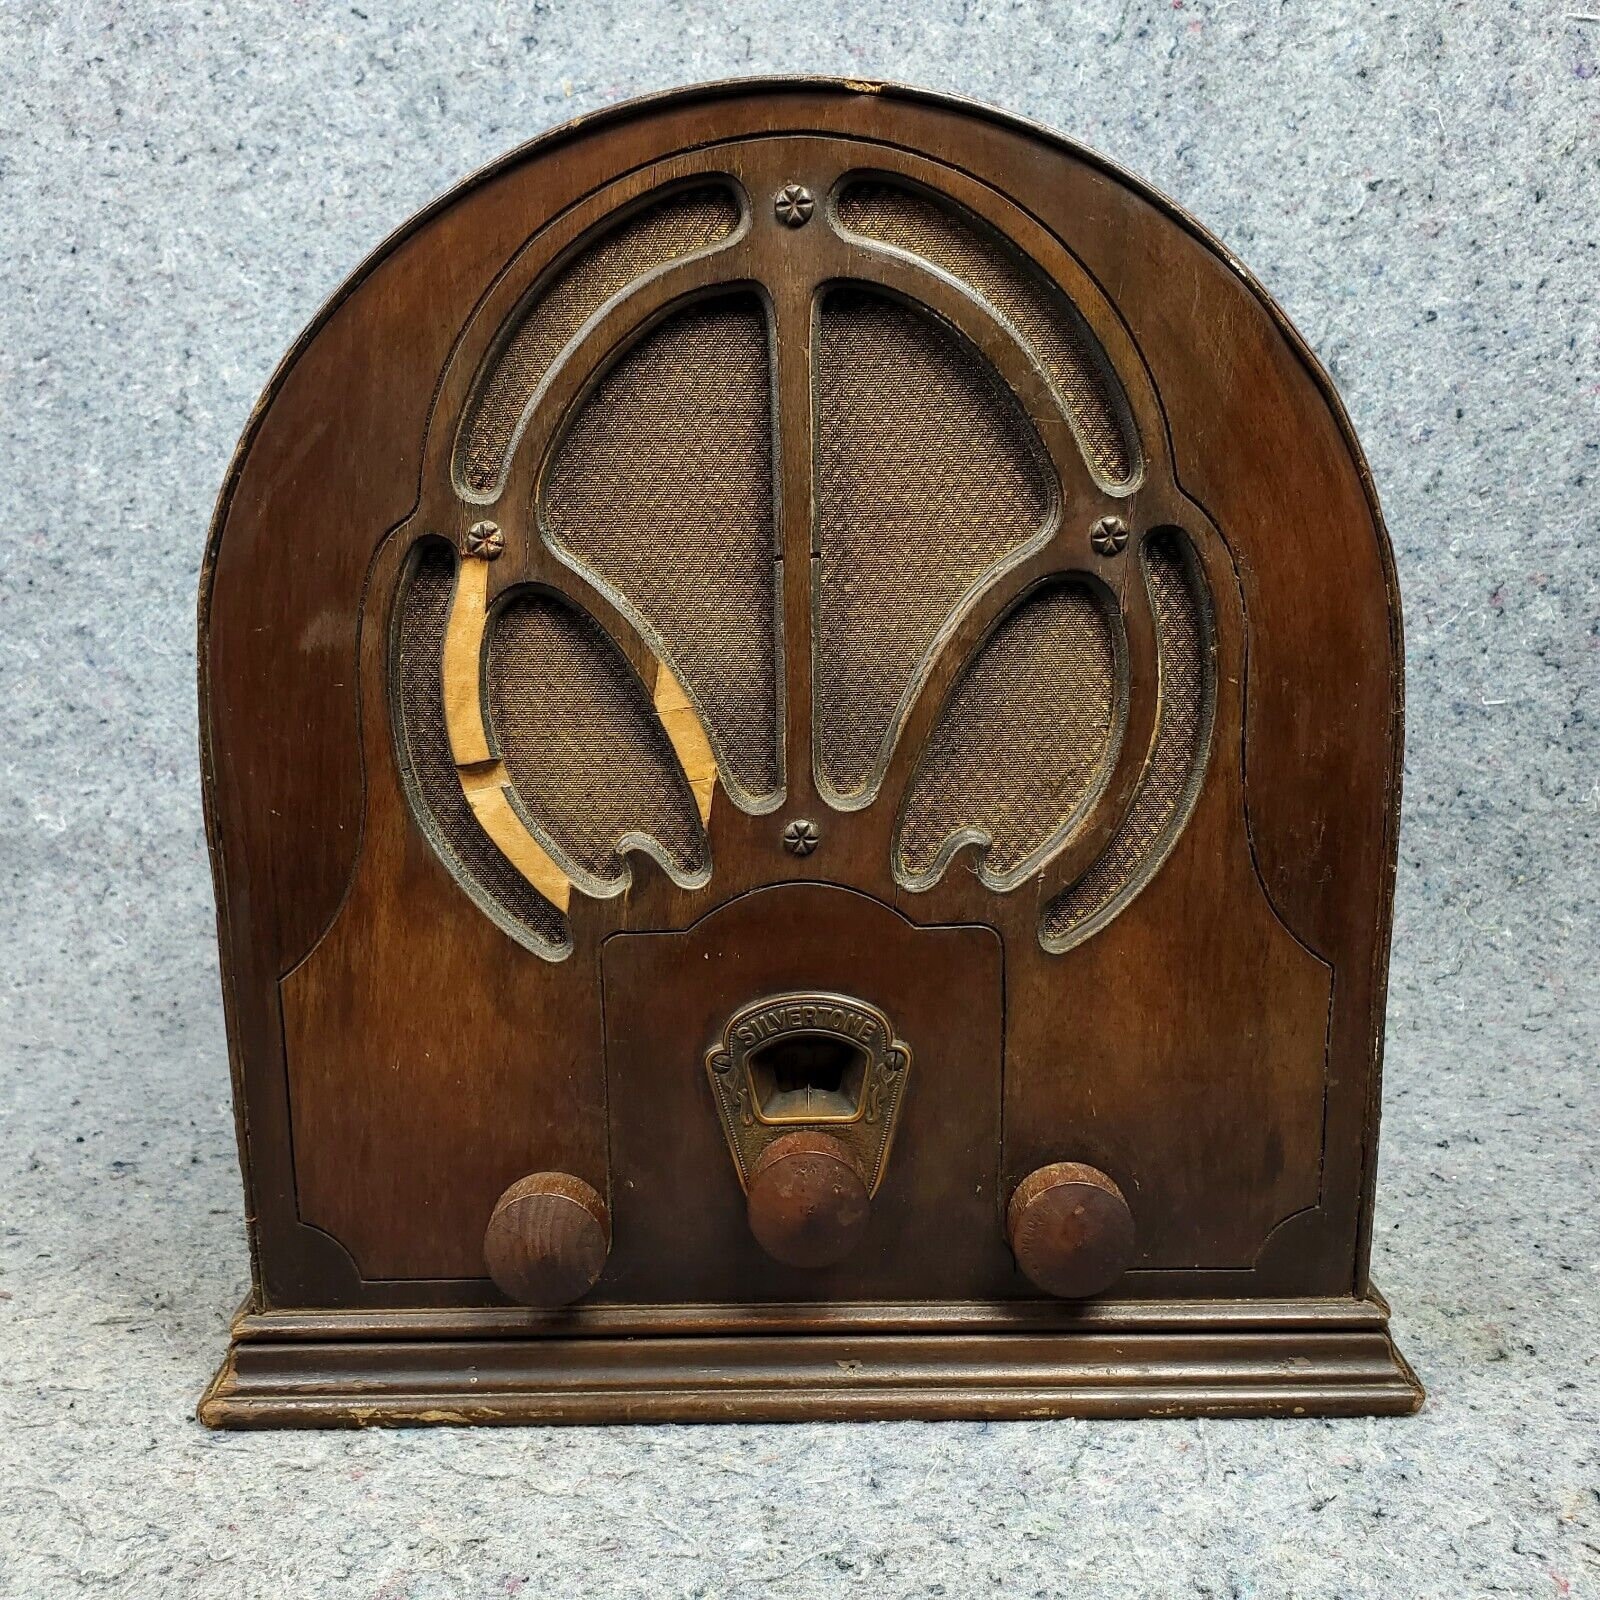 vintage MAJESTIC 50 CATHEDRAL RADIO parts: WOOD SHELL & BRASS